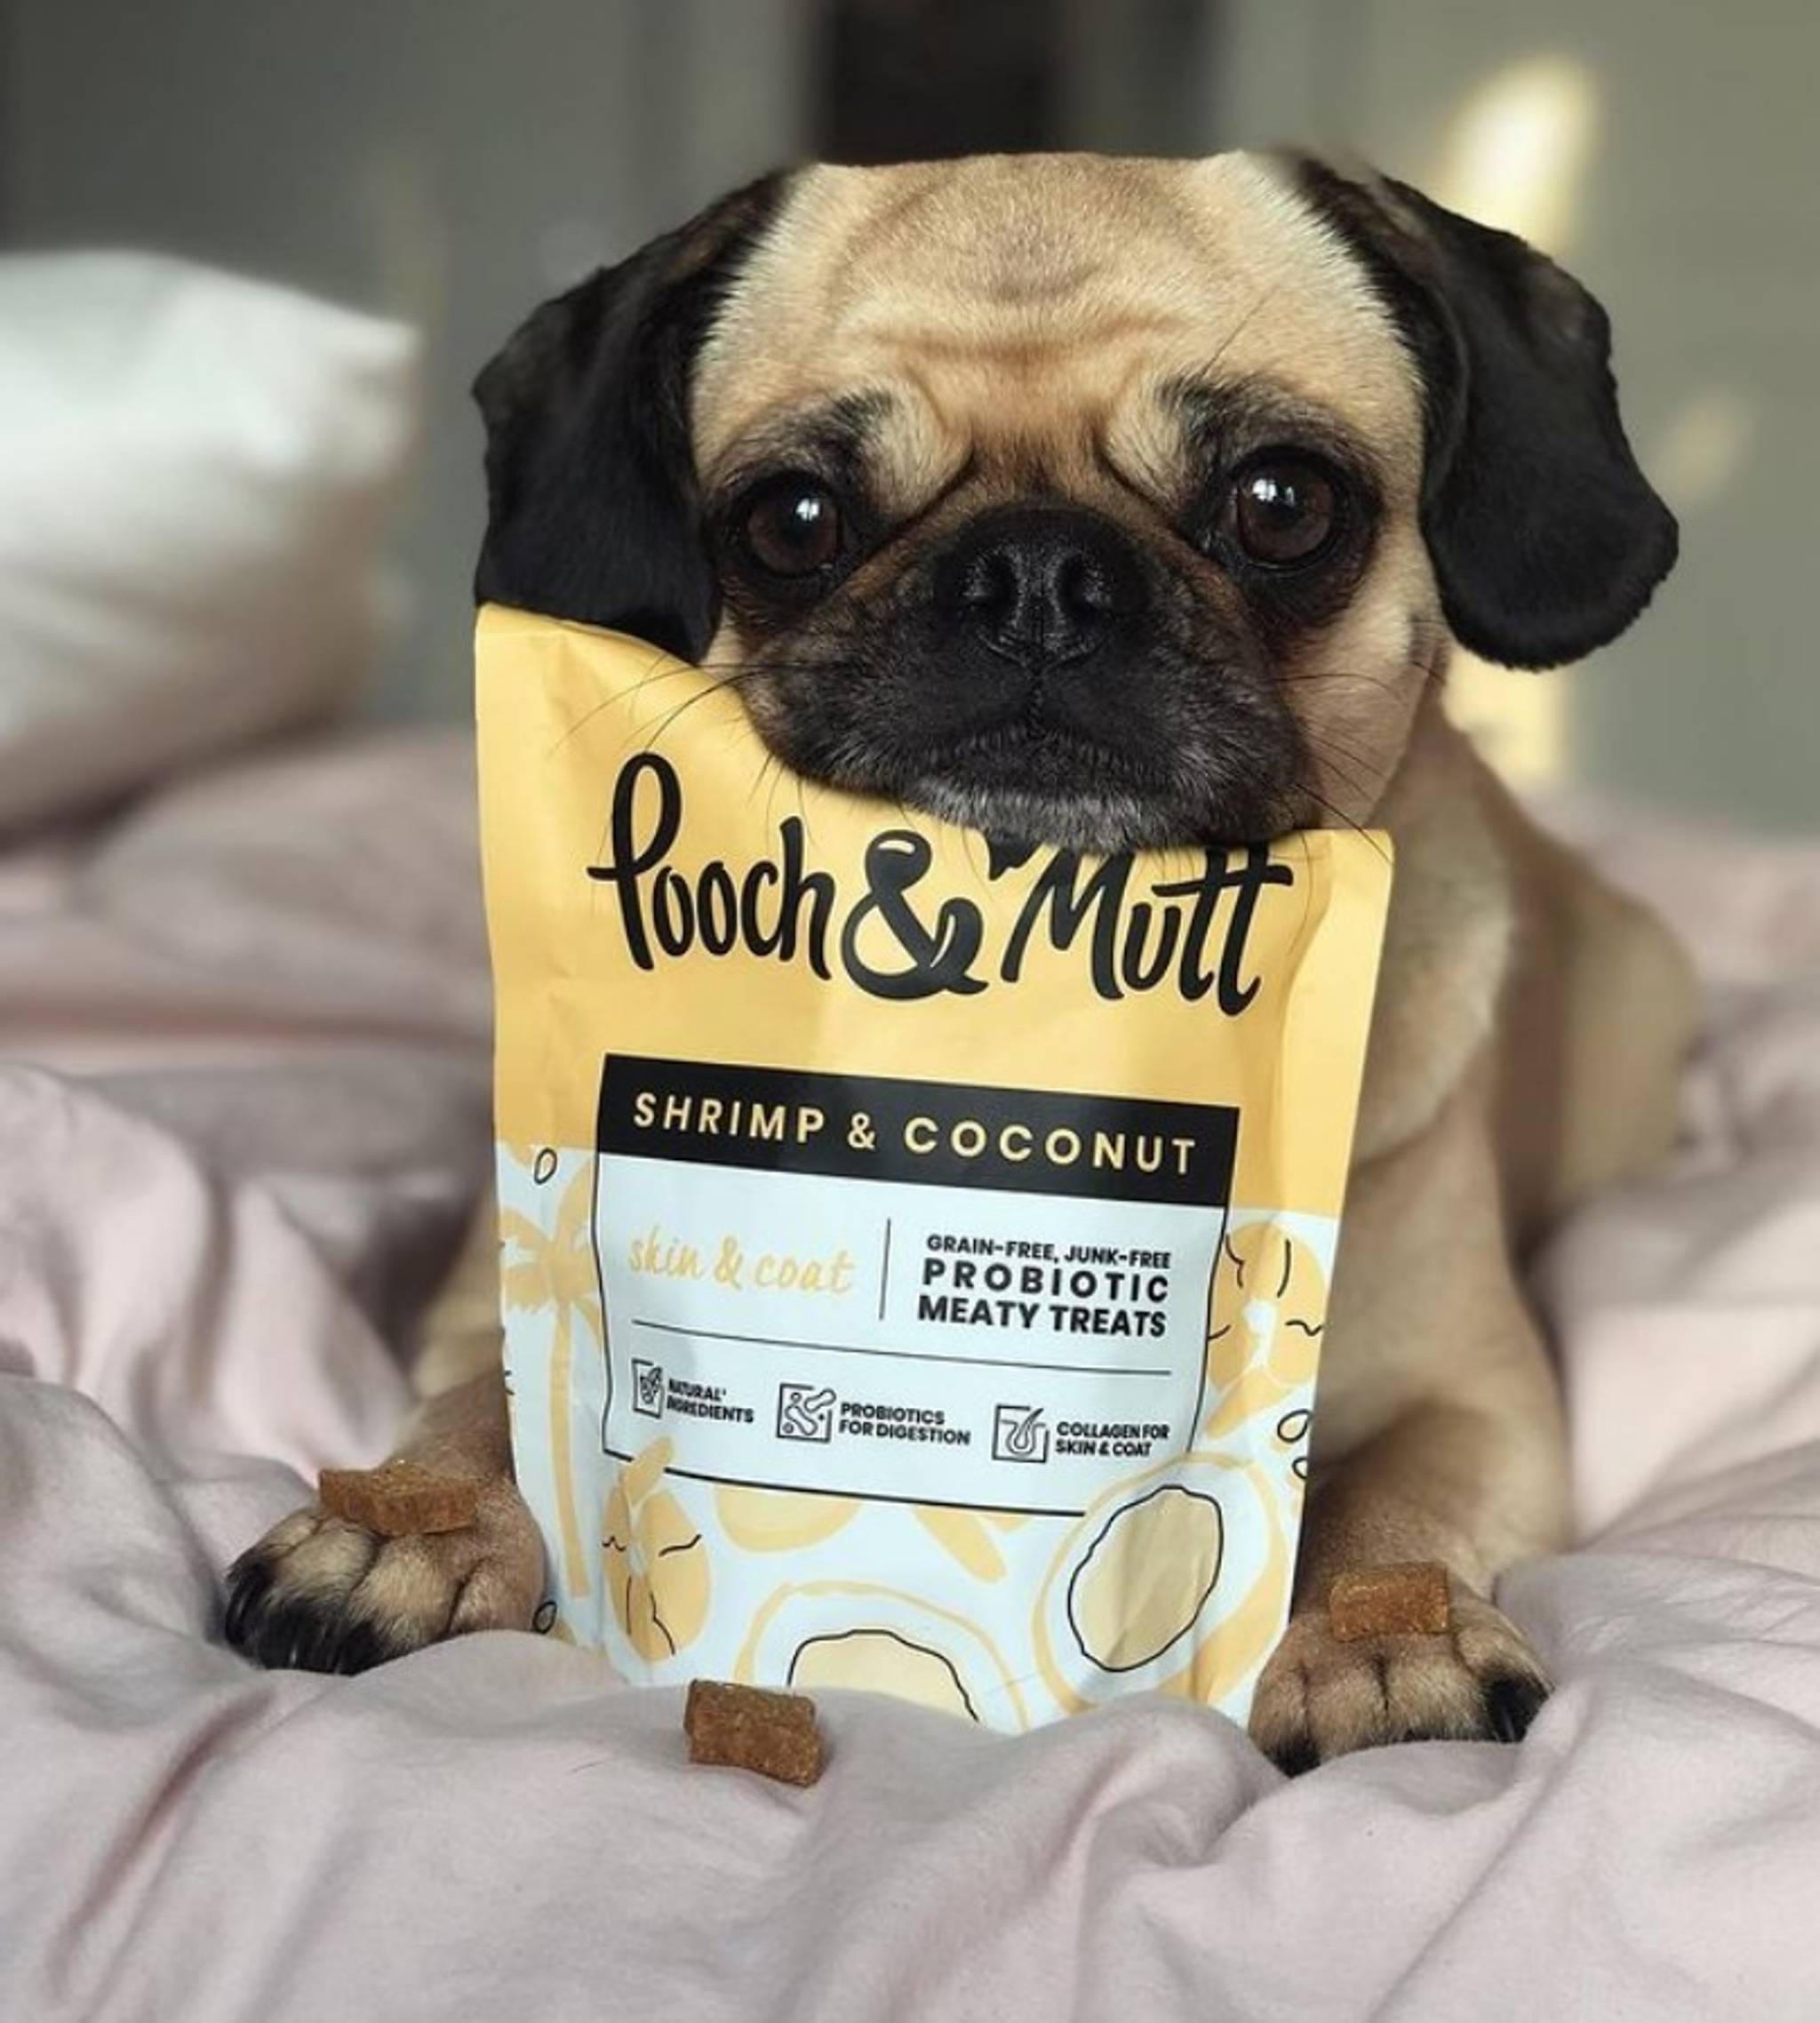 Pooch & Mutt sells functional food for pets